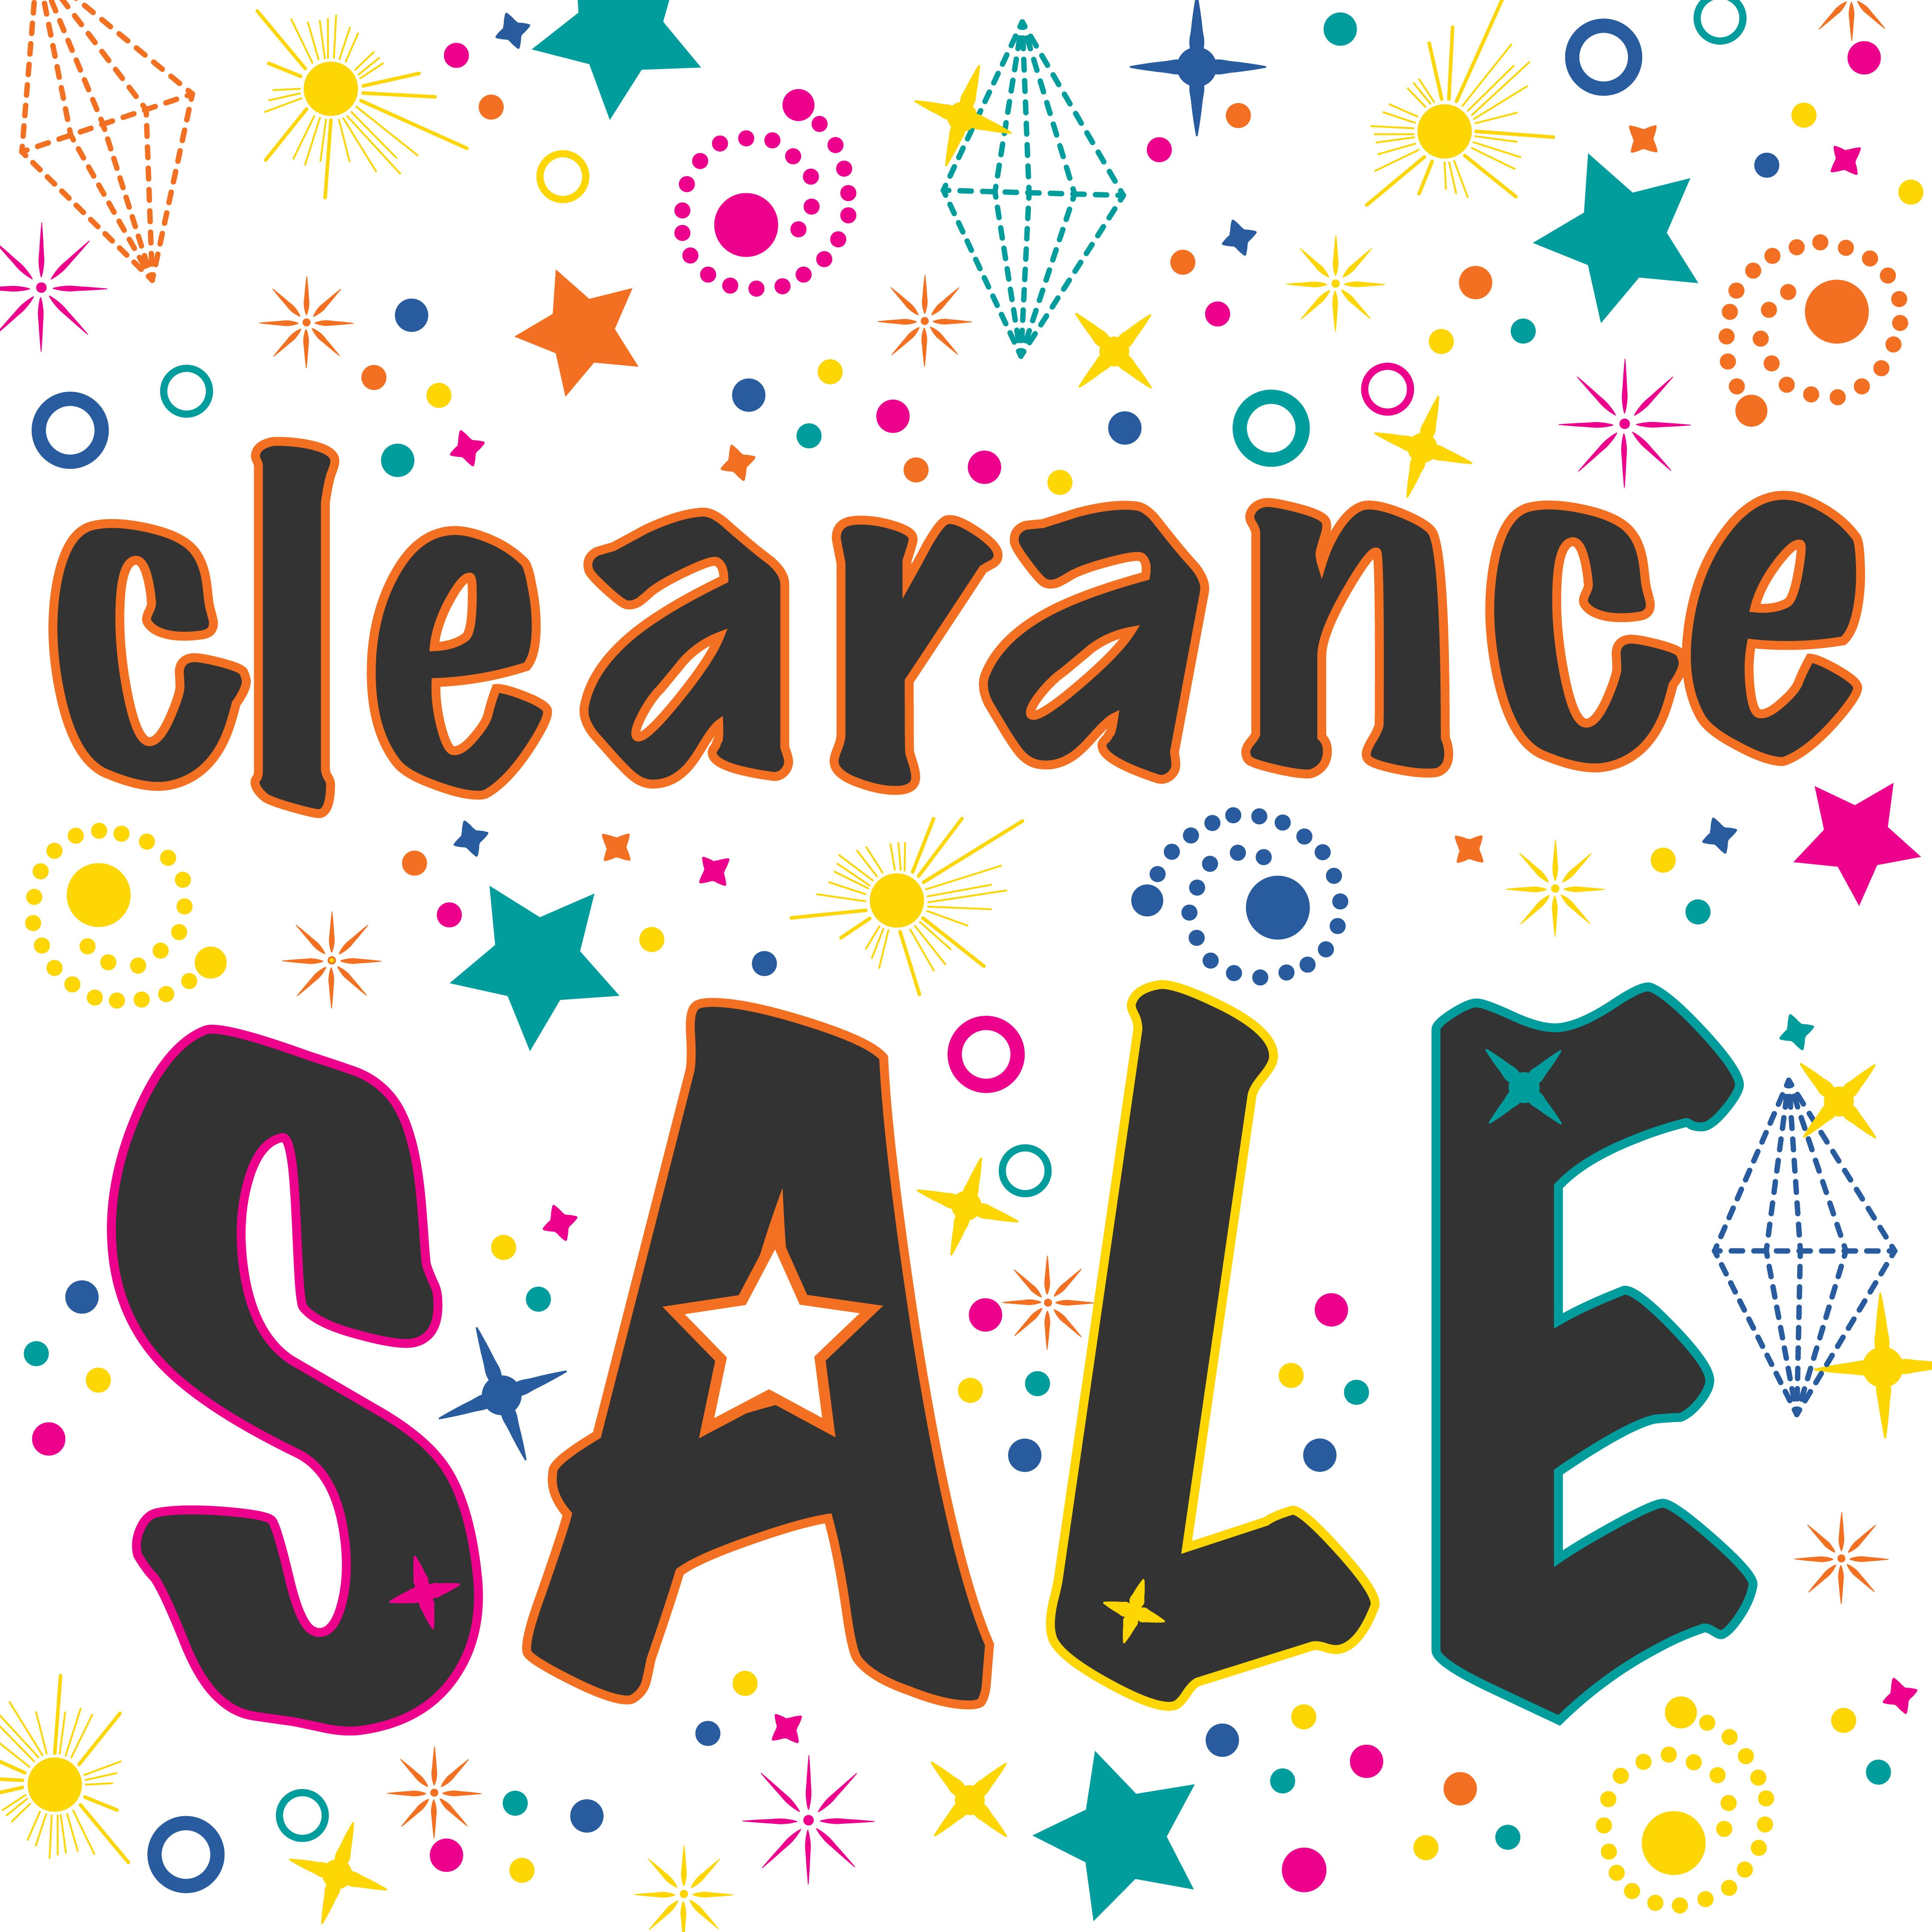 Clearance - 25% - 40% Off